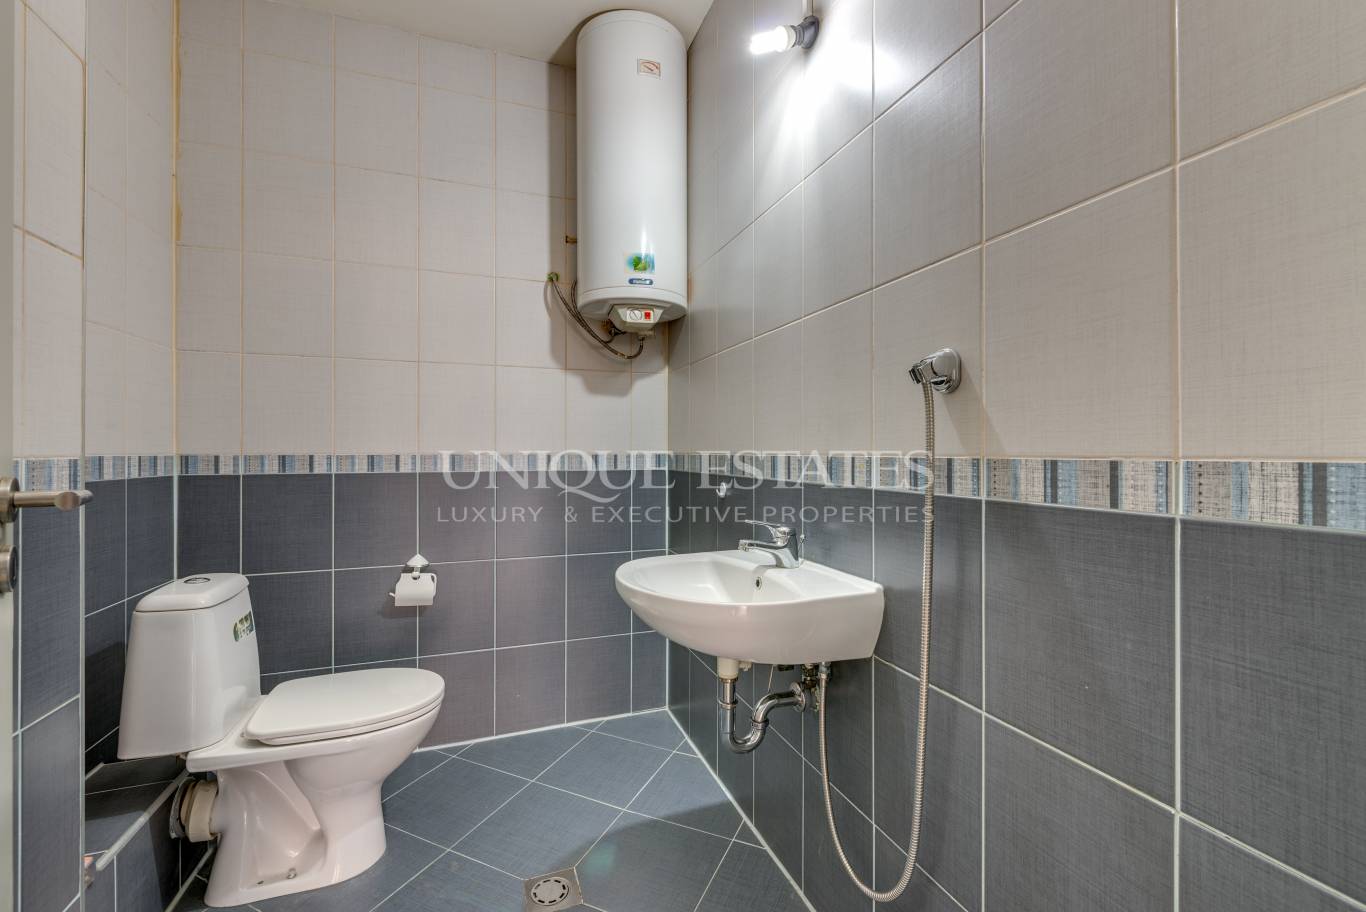 Commercial property for sale in Sofia, Manastirski livadi - West with listing ID: K13968 - image 4